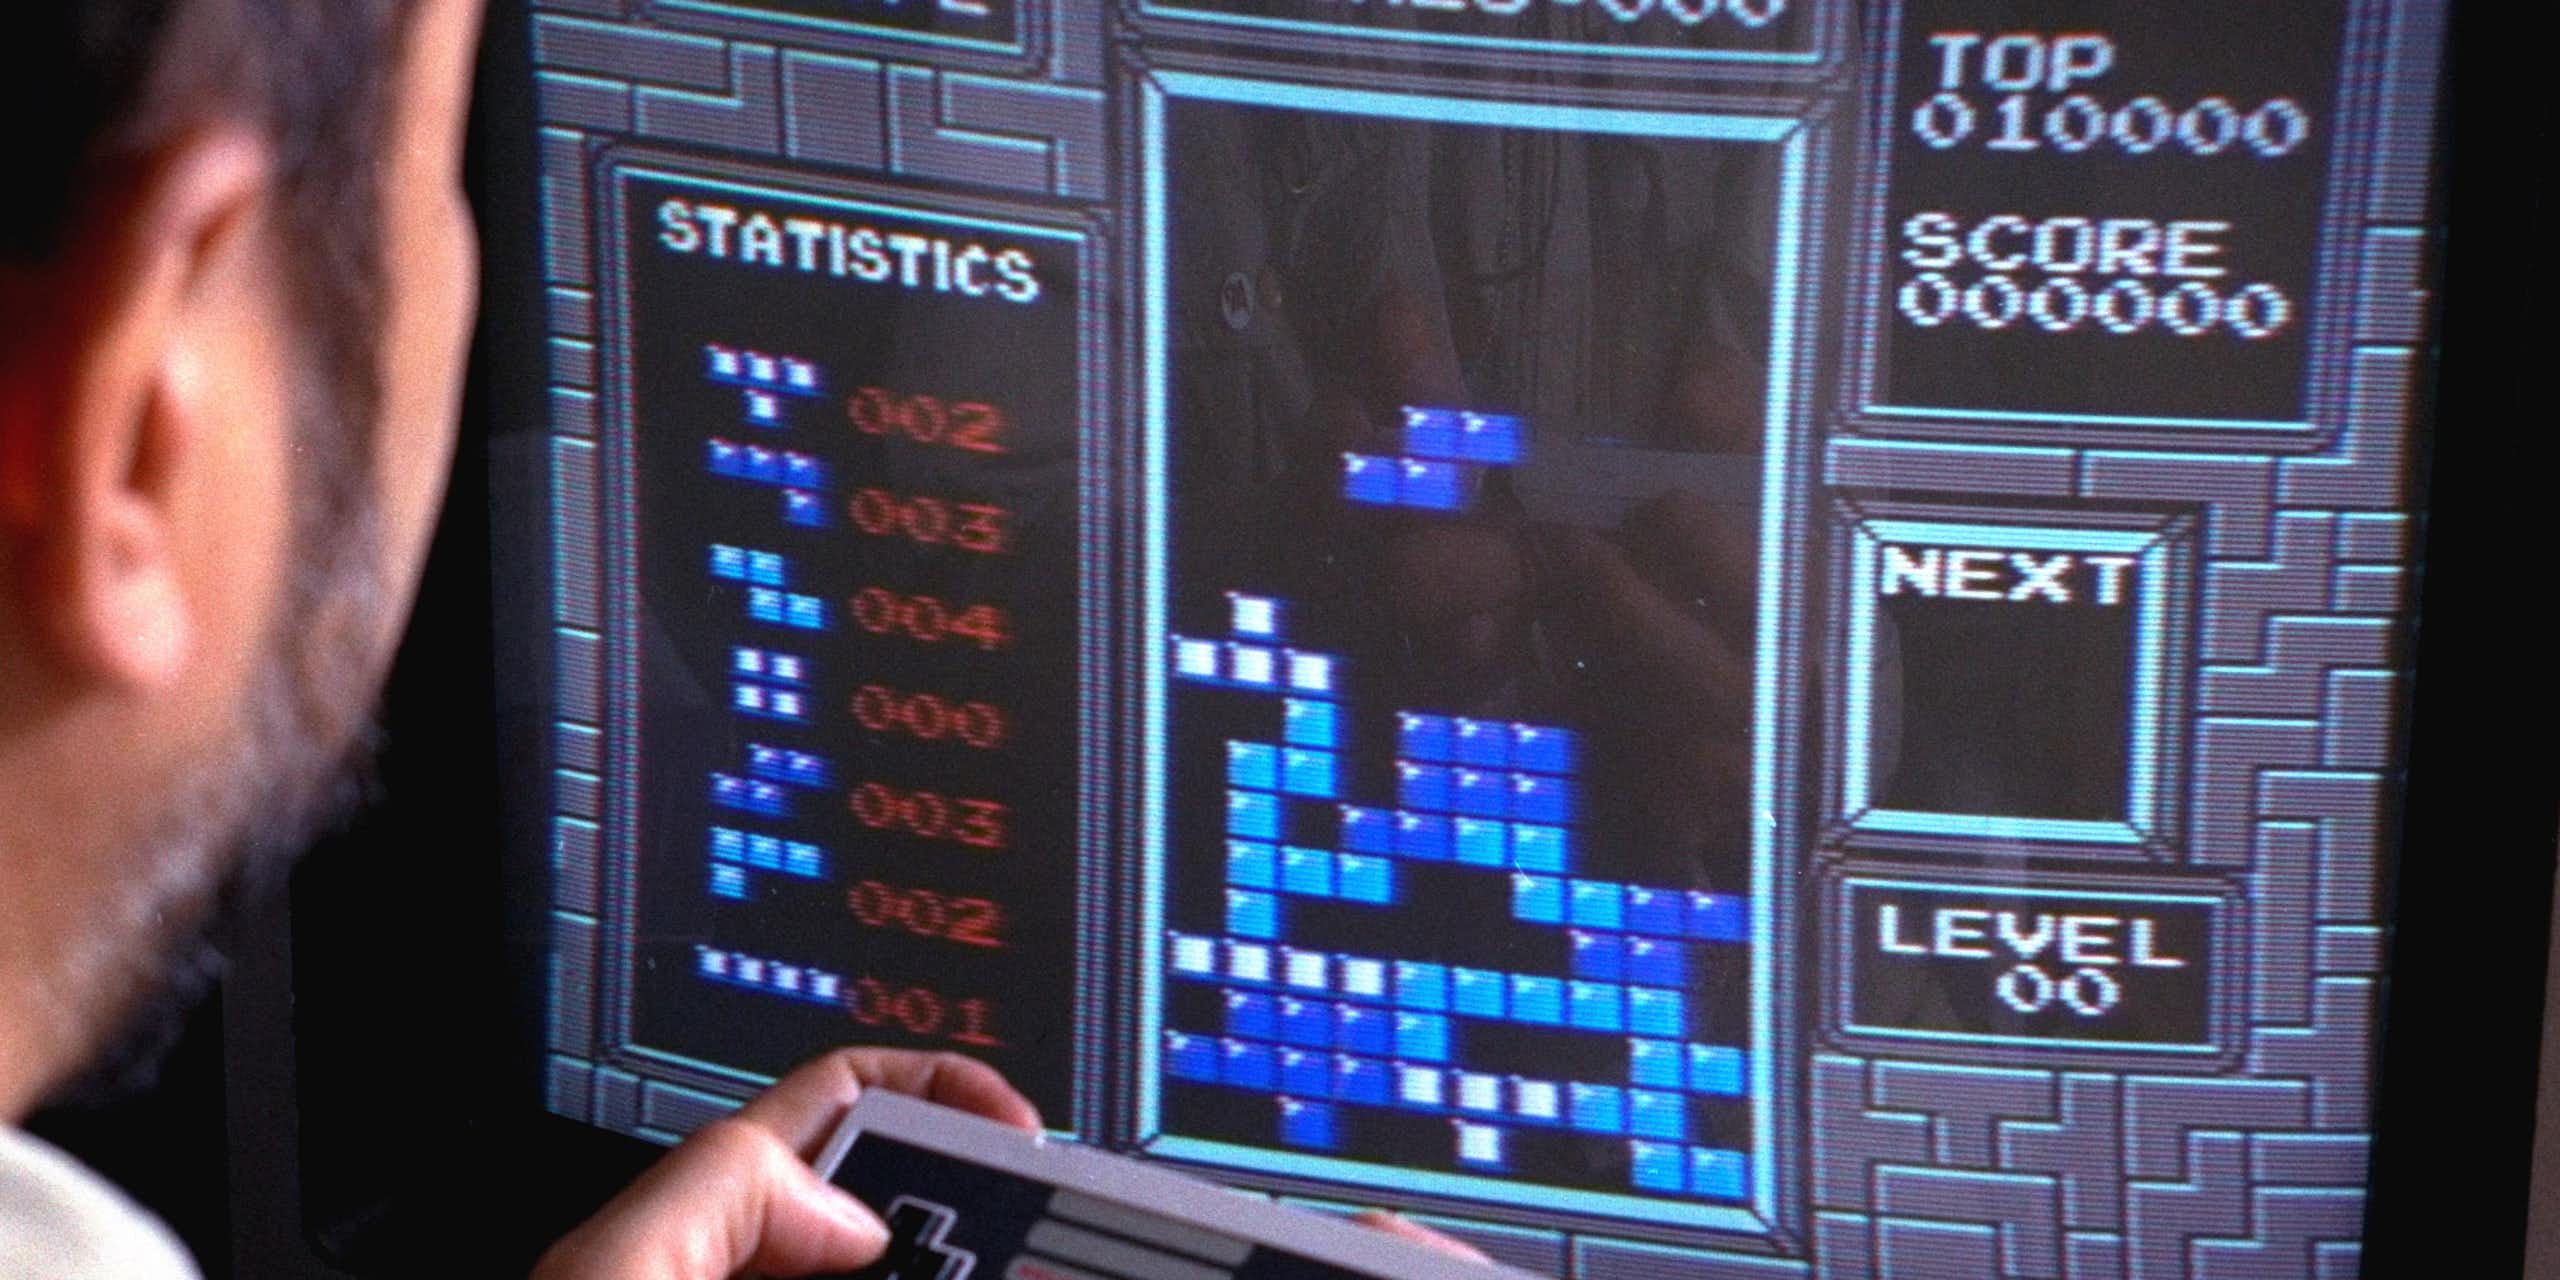 A man sitting in front of a TV screen displaying a 'Tetris' board with shapes stacking on top of each other. The man is holding a video game controller. 